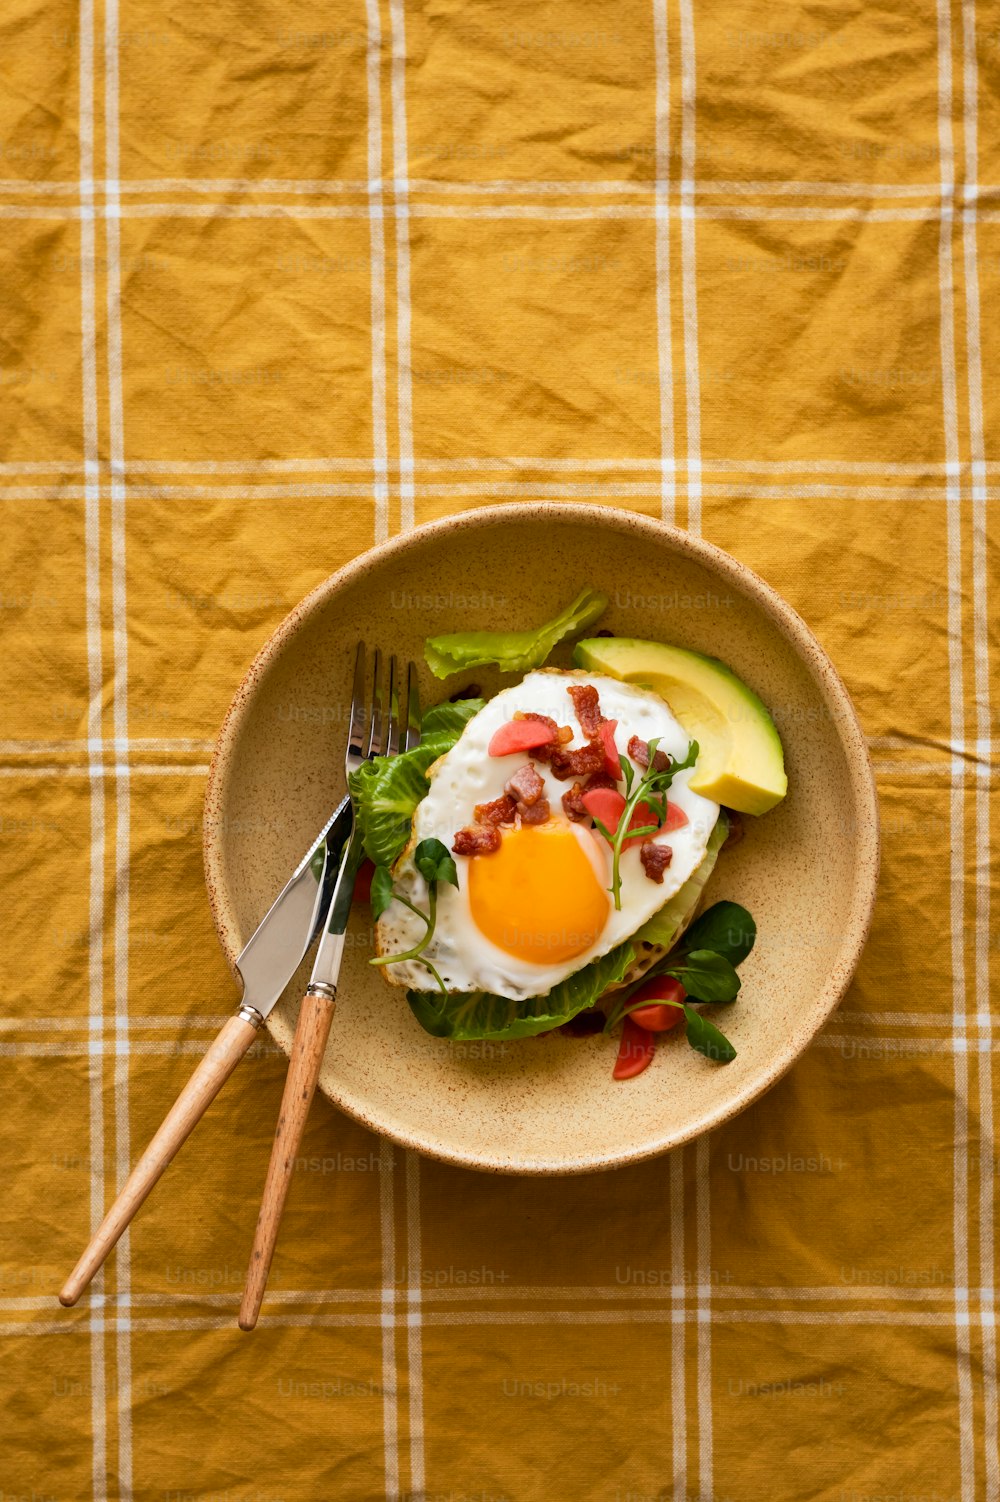 a plate of food with an egg and avocado